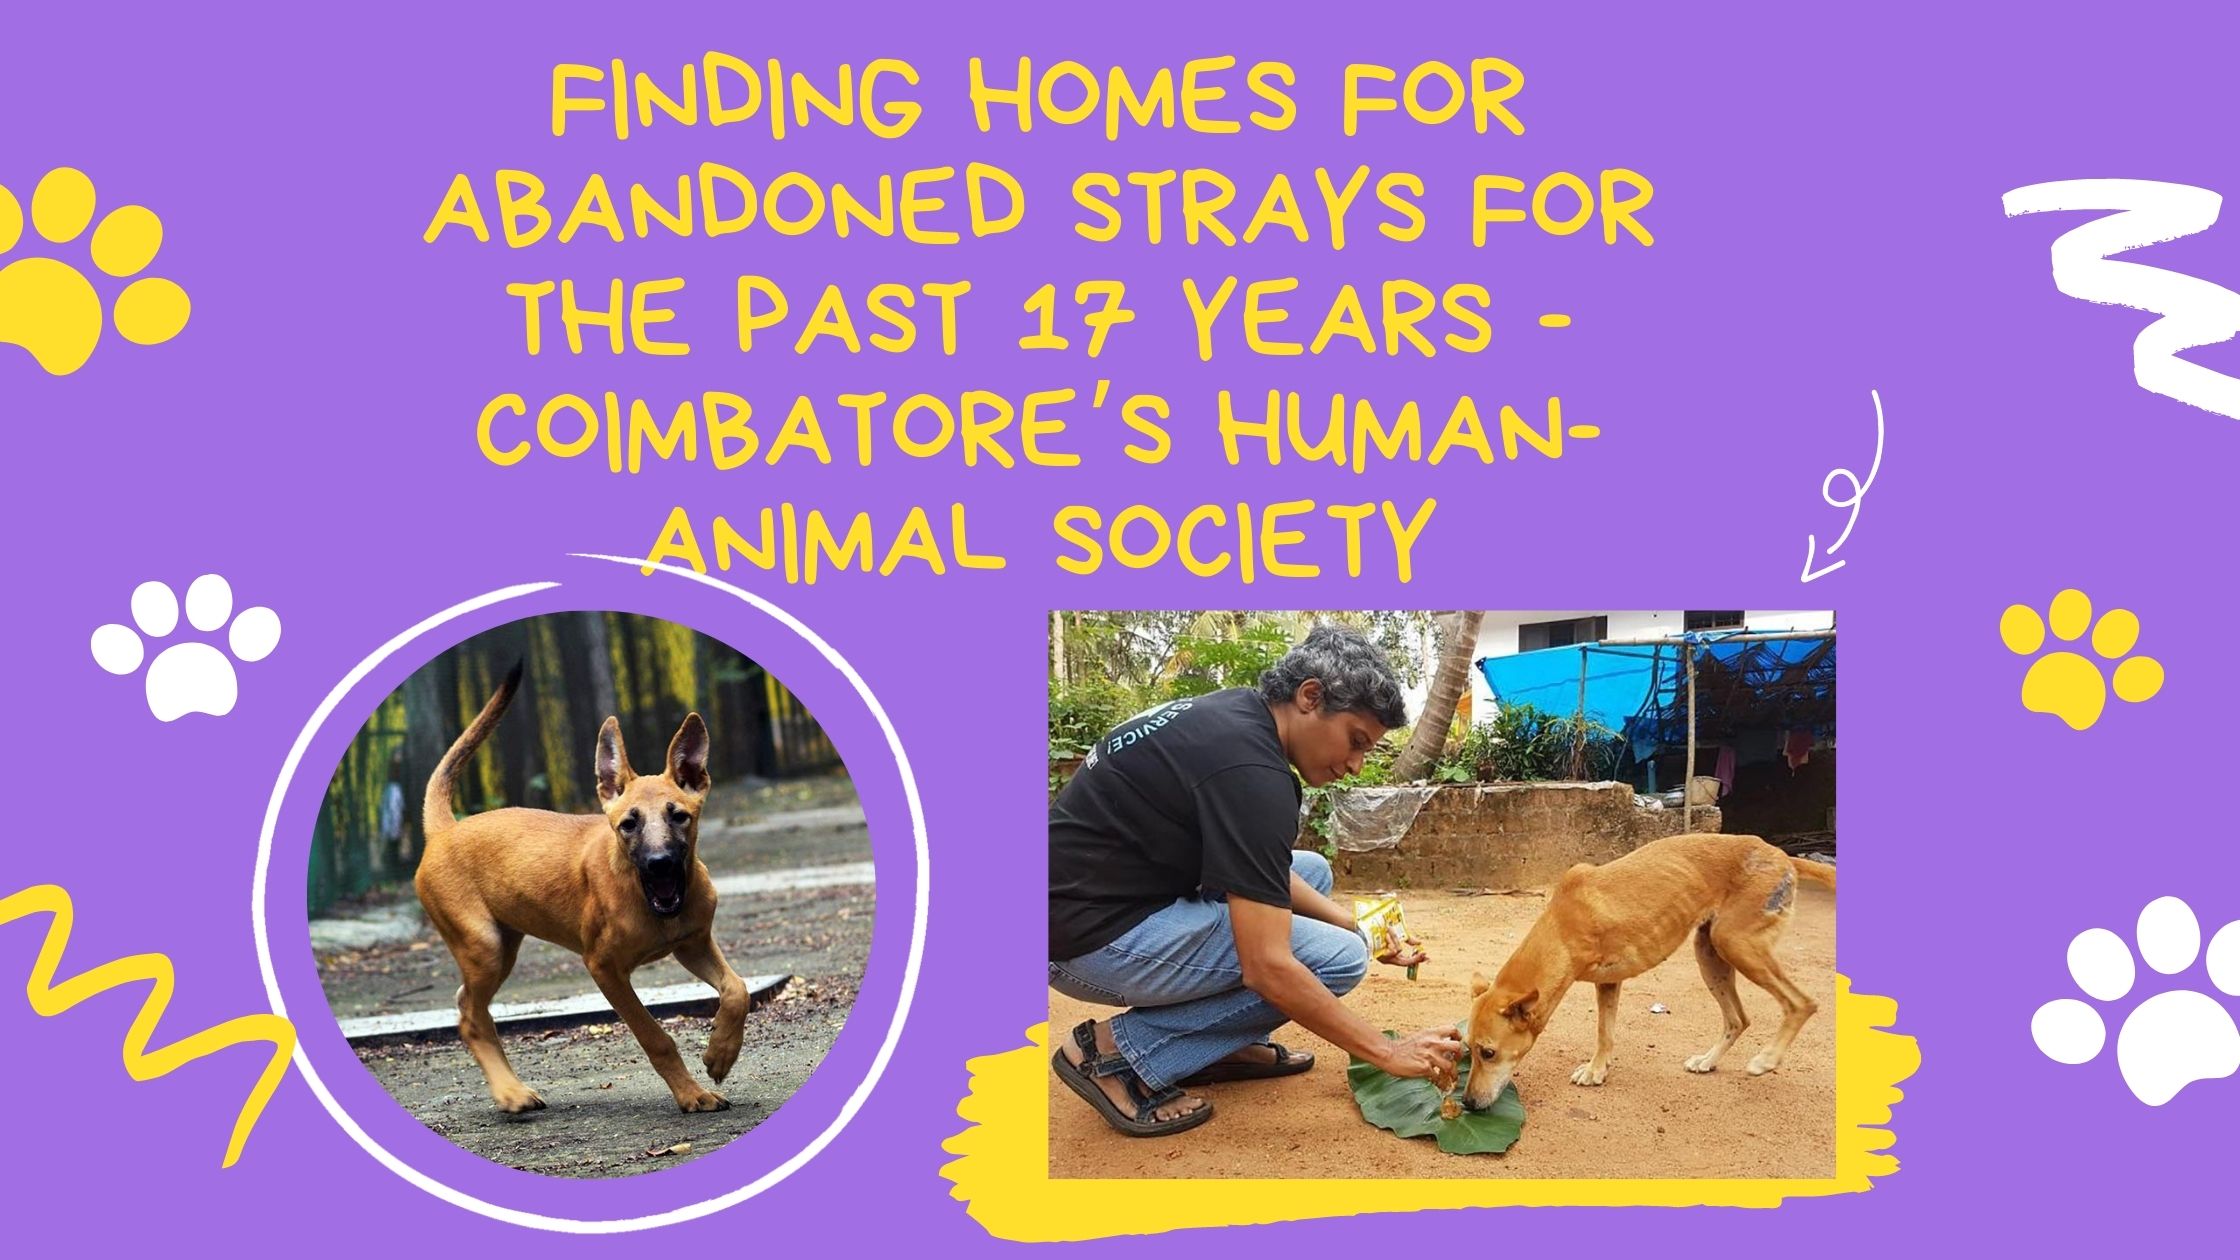 Finding homes for abandoned strays for the past 17 years- Coimbatore’s Human-Animal Society